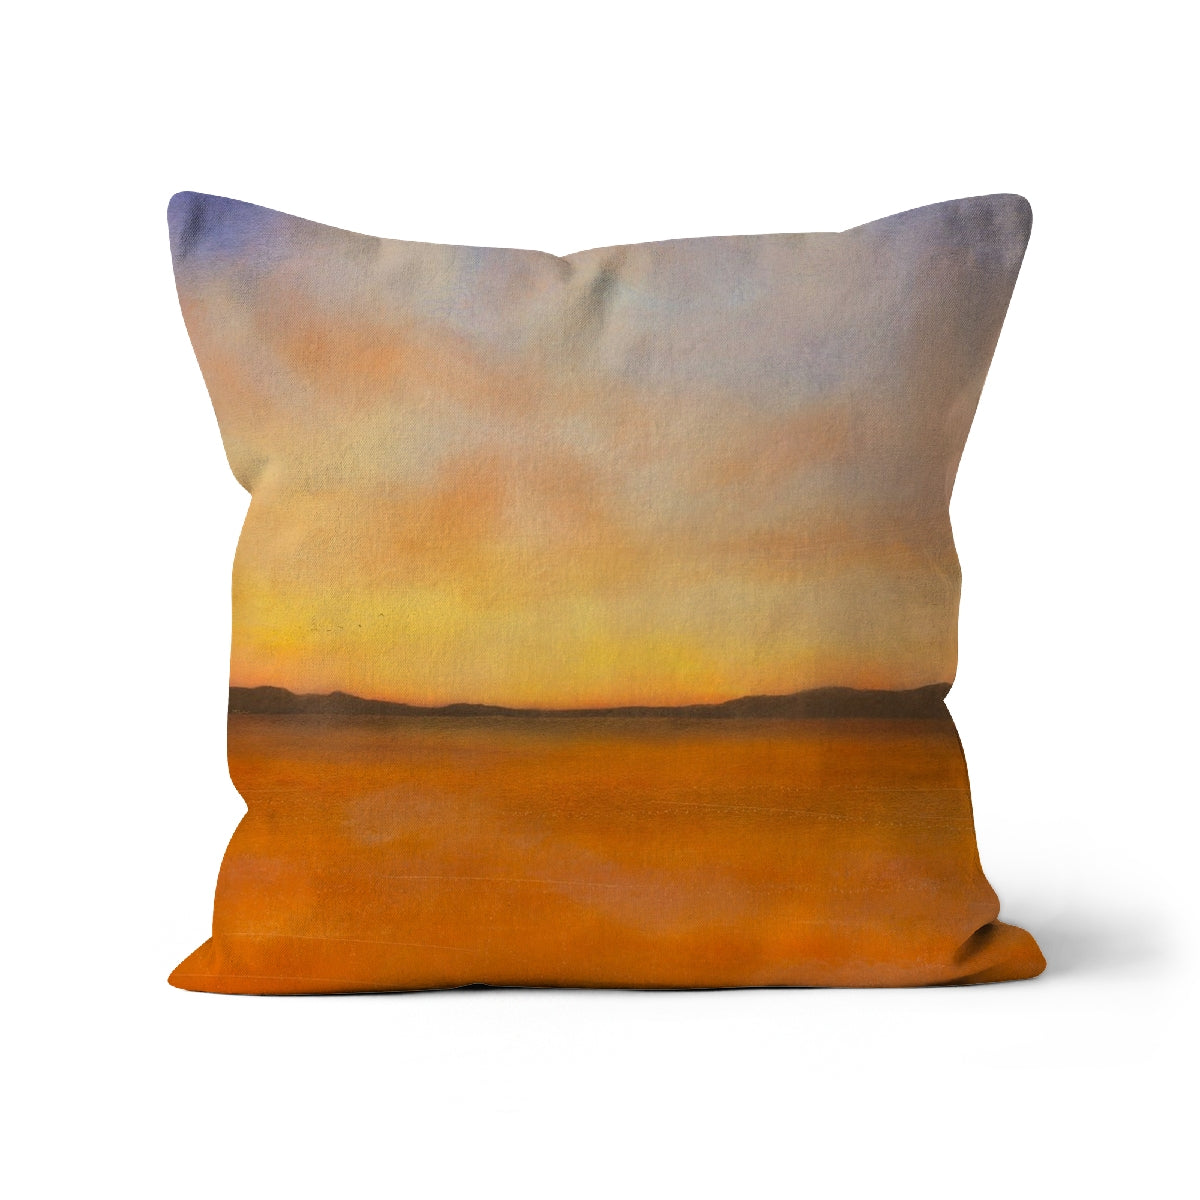 Islay Dawn Art Gifts Cushion-Cushions-Hebridean Islands Art Gallery-Faux Suede-18"x18"-Paintings, Prints, Homeware, Art Gifts From Scotland By Scottish Artist Kevin Hunter